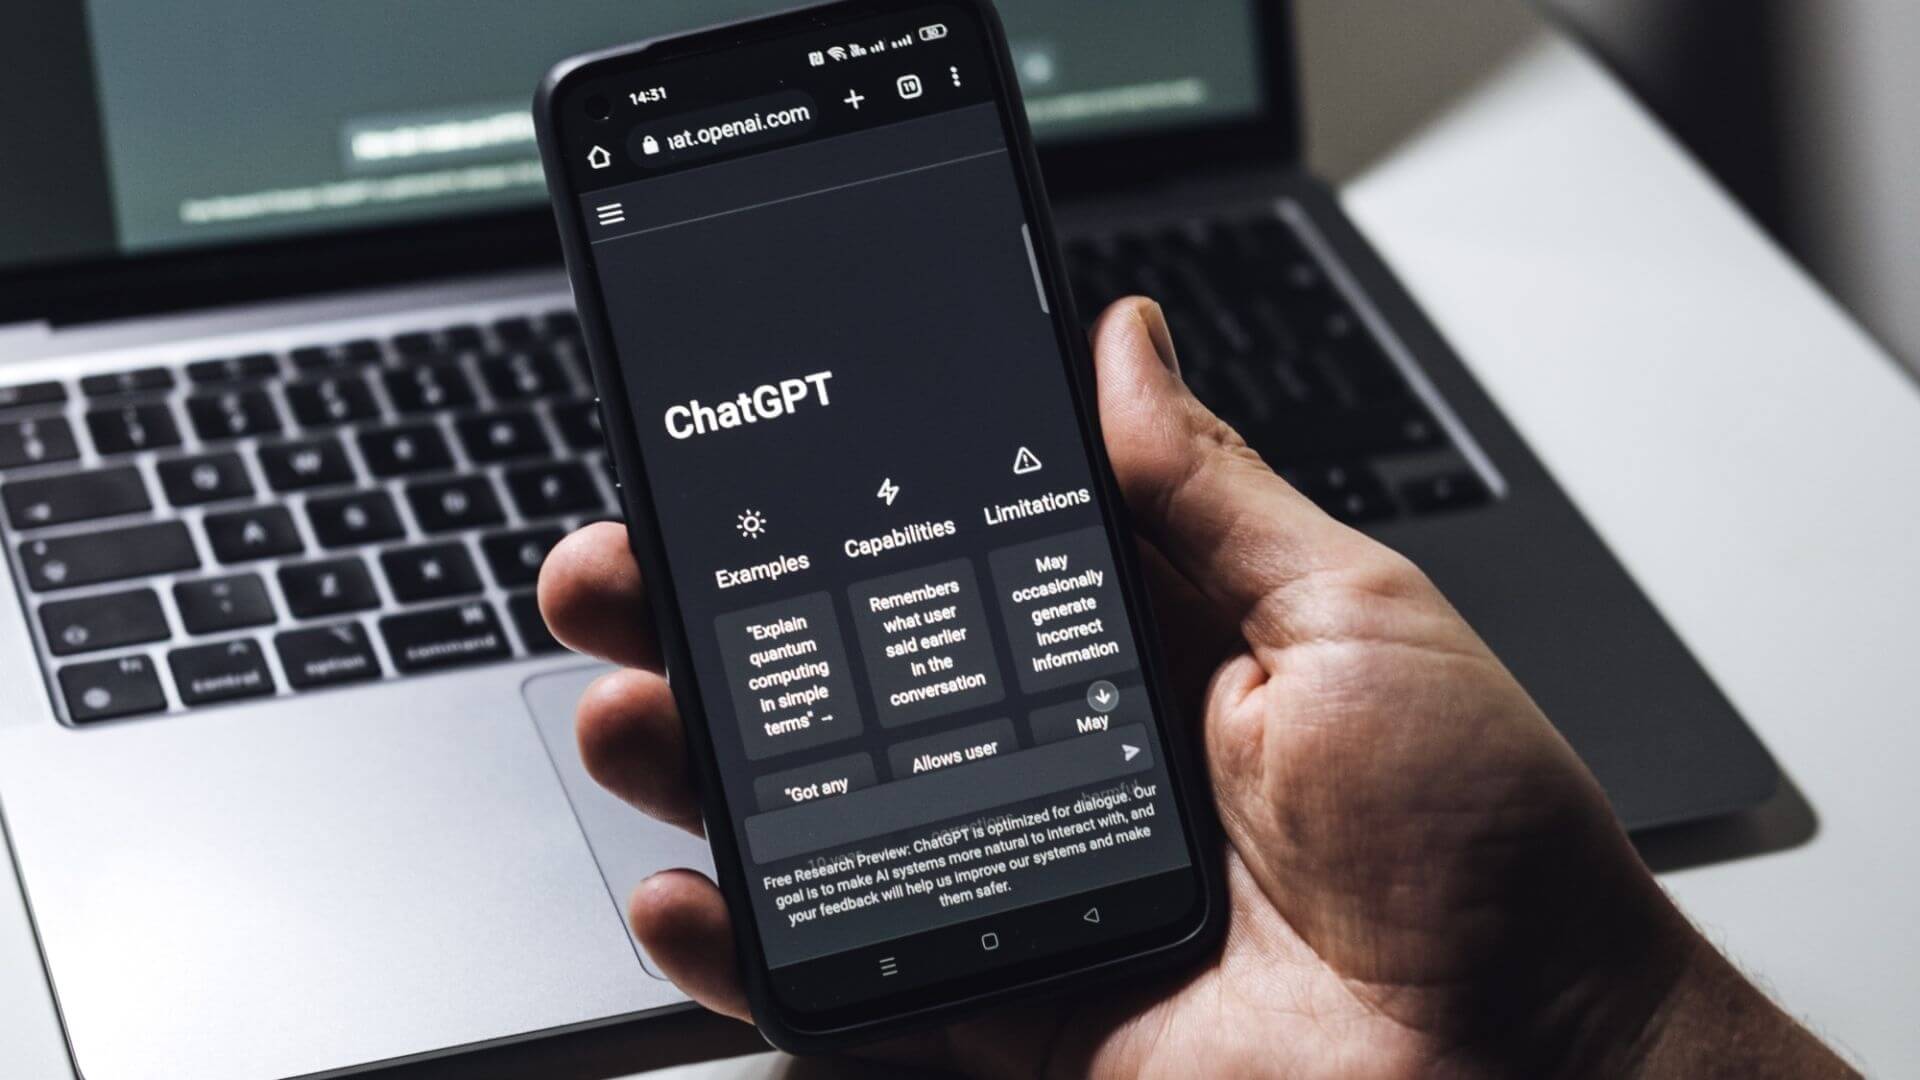 OpenAI finally releases the ChatGPT app for Android